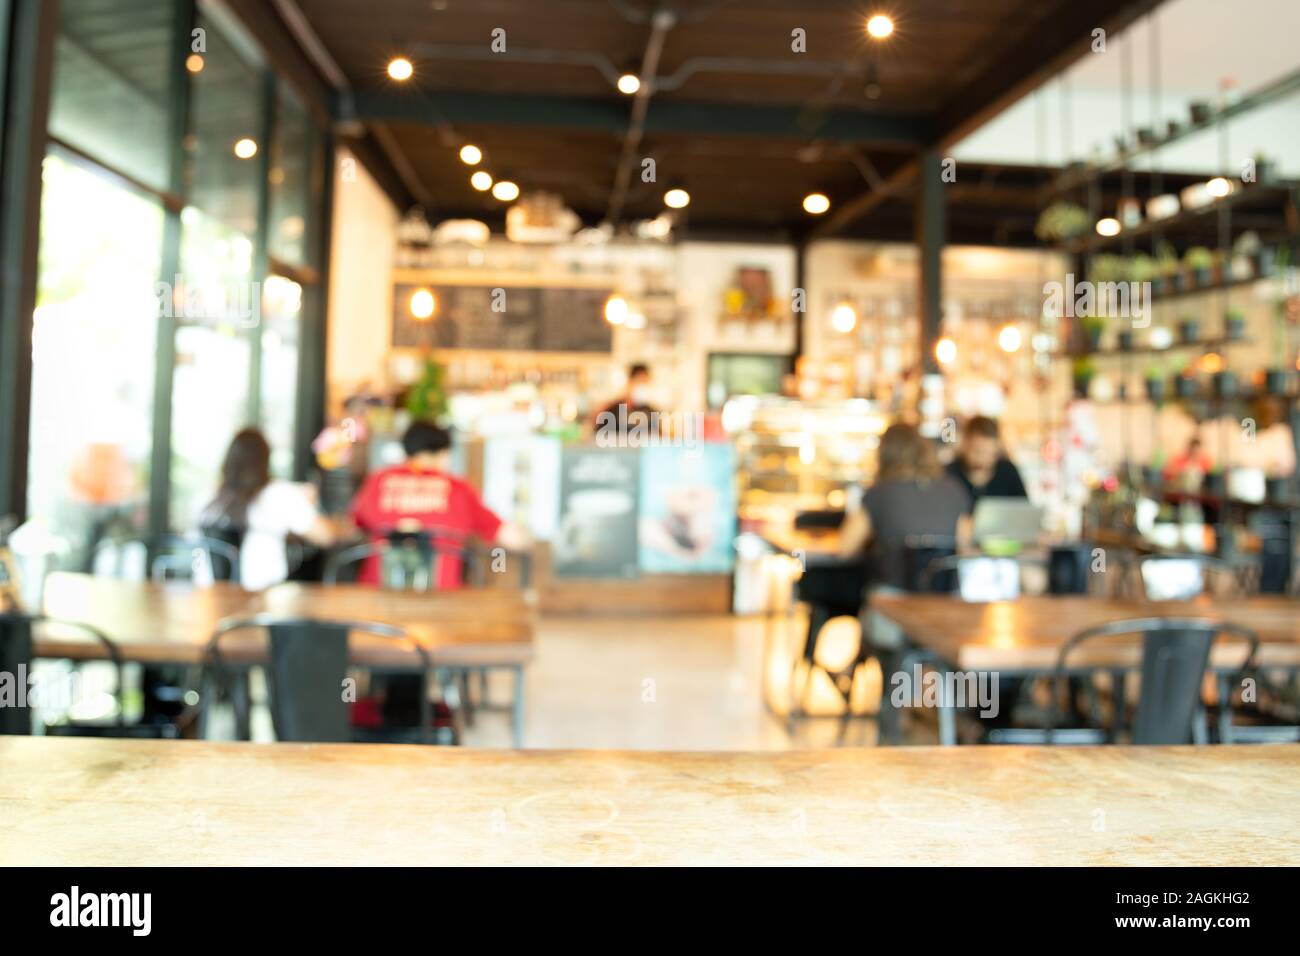 Blurred background barista service customers at counter in coffee shop business concept. Stock Photo